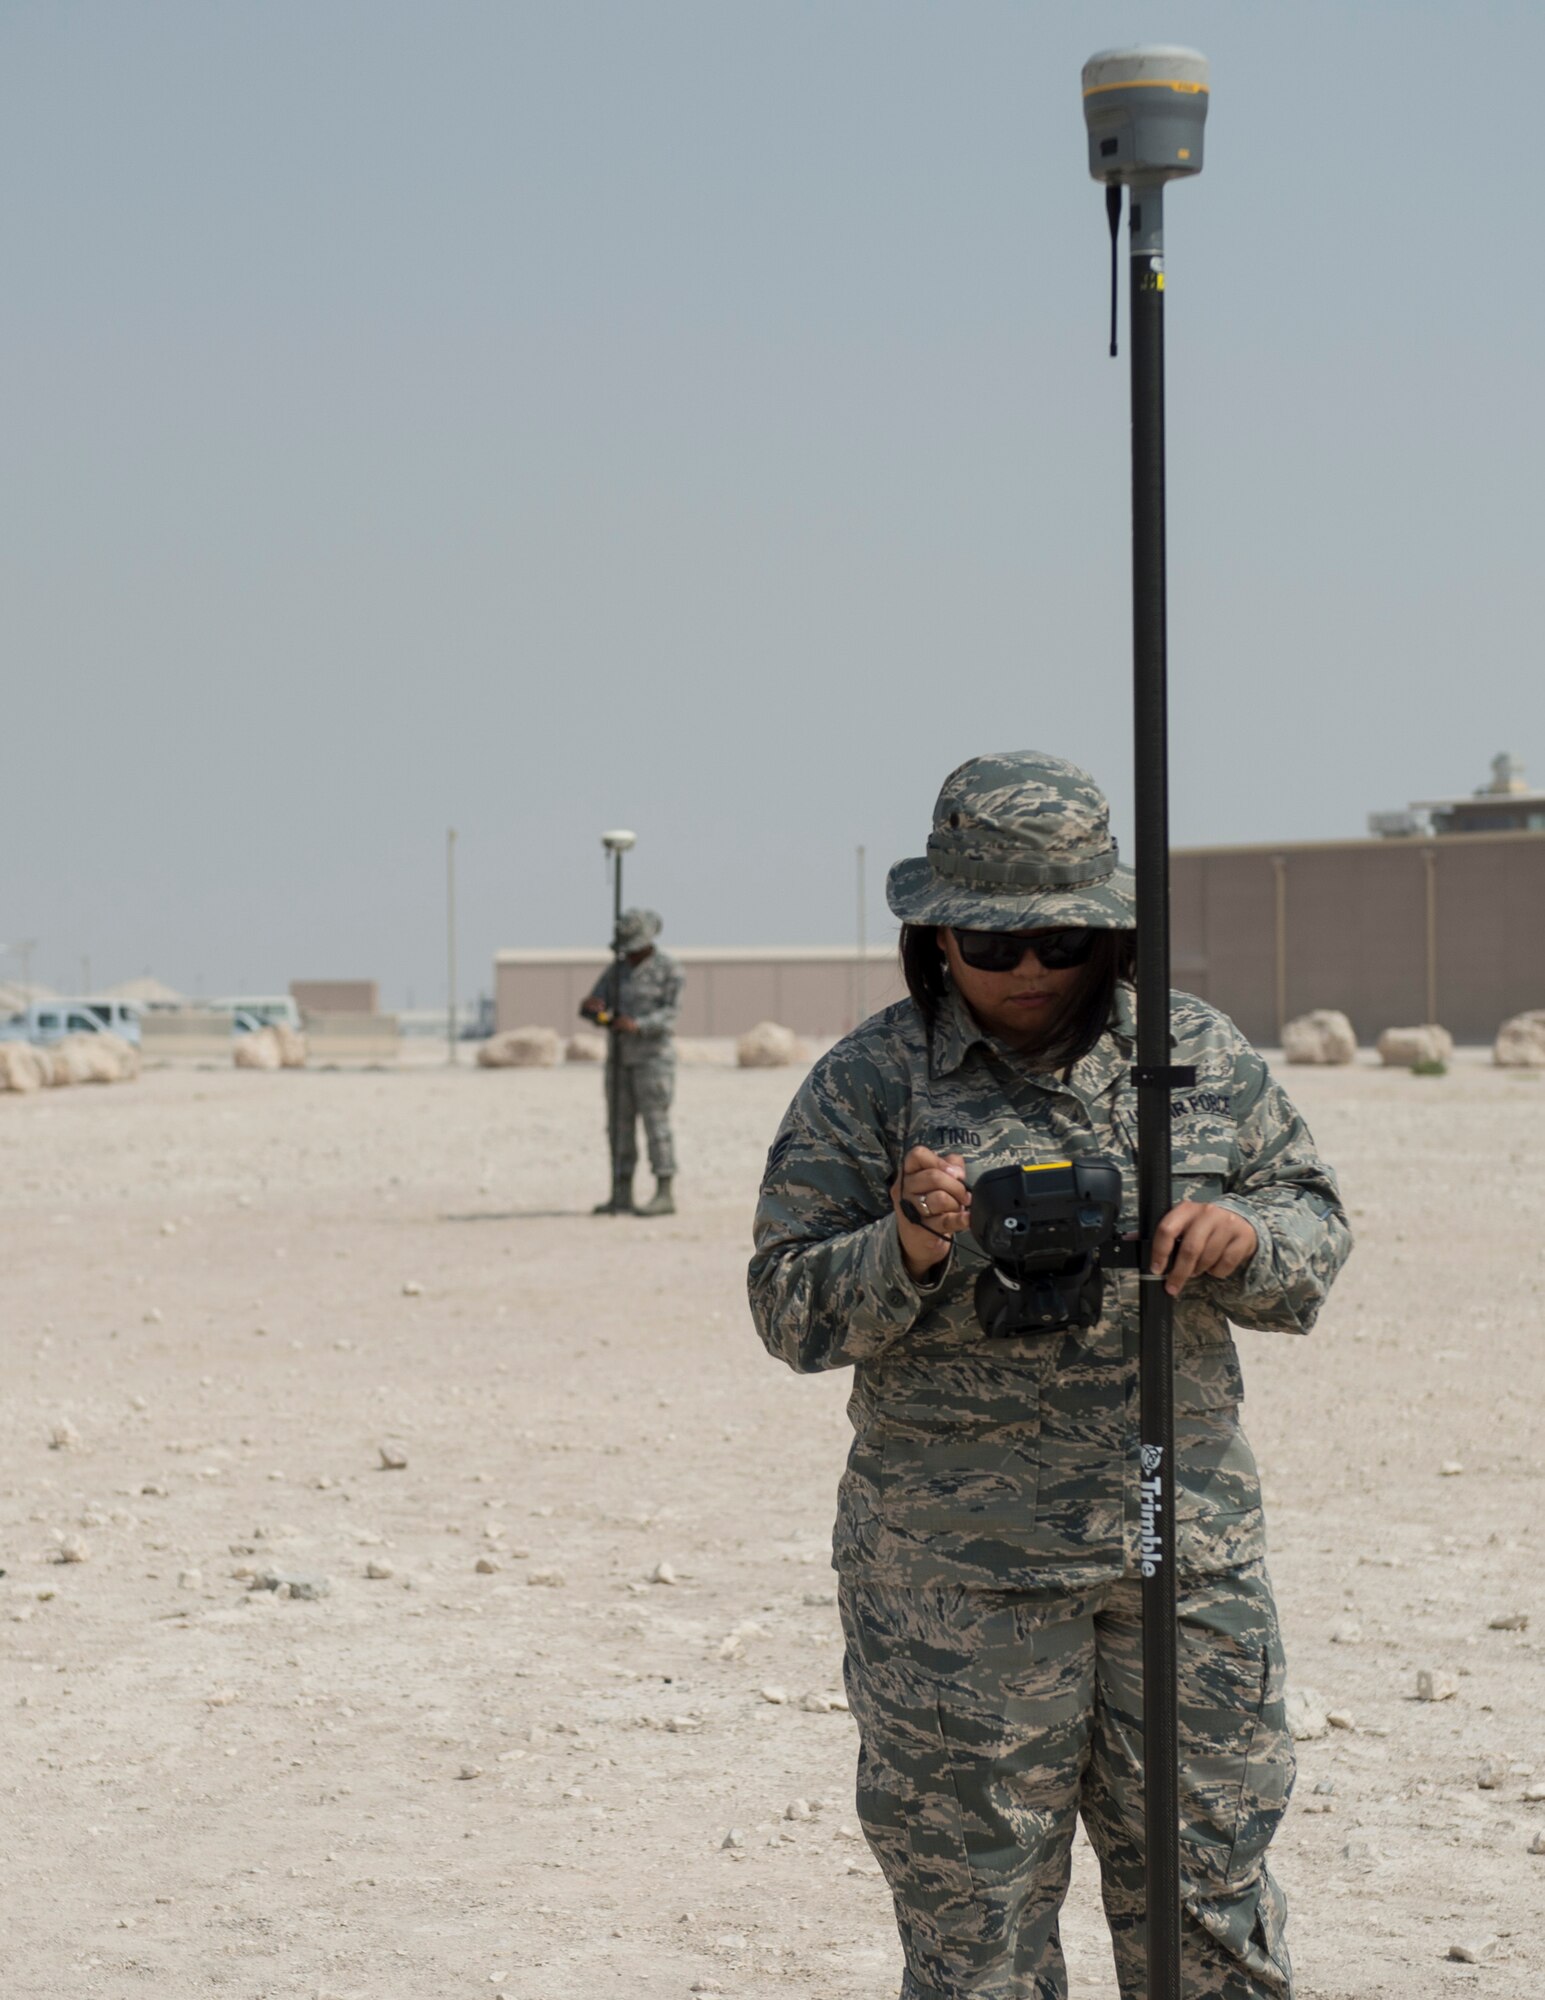 U.S Air Force Senior Airman Zamantha Tinio, front, an expeditionary geobase manager and Senior Airman Dalicia Brenson, an engineering technician with the 379th Expeditionary Civil Engineer Squadron, record the coordinates and elevations on the Trimble GPS Land Surveying Equipment at Al Udeid Air Base, Qatar, Aug. 2, 2017.